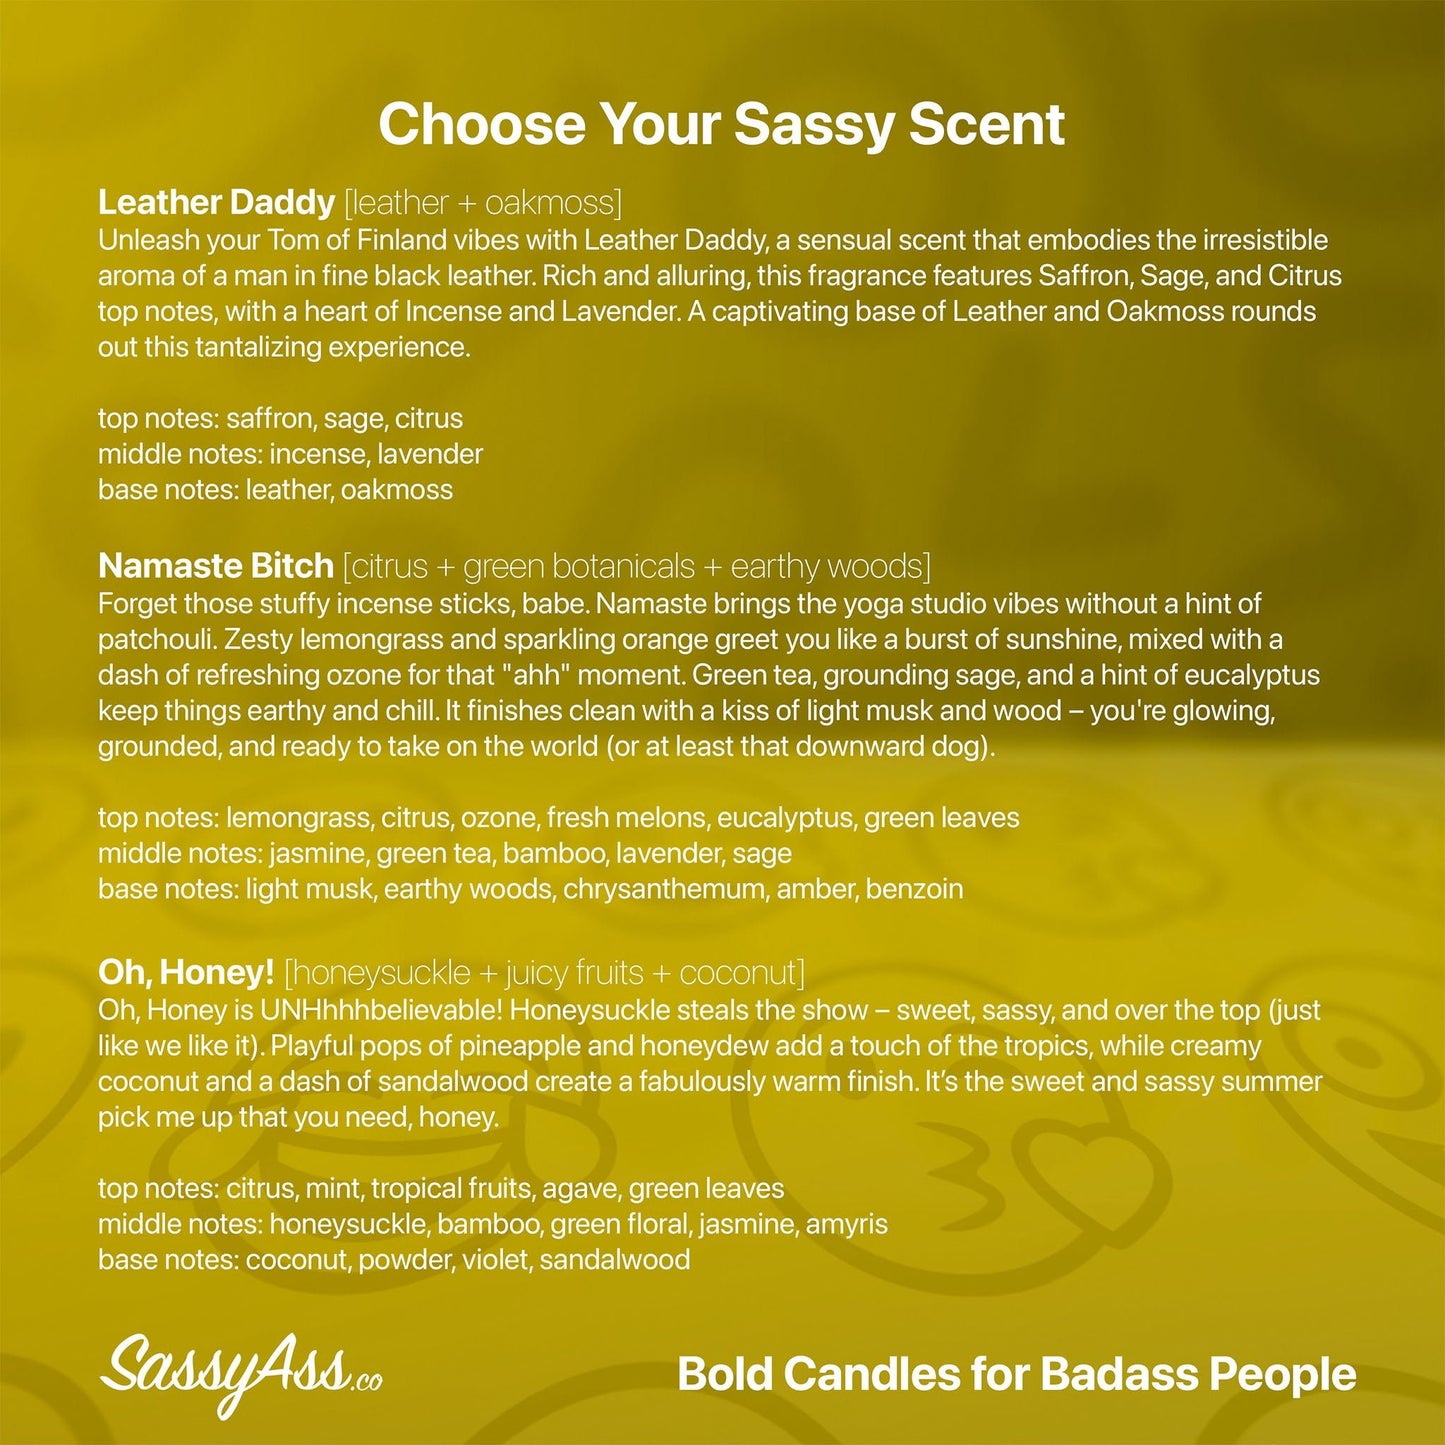 Manifesting Bad Bunny In My DMs - Scented Soy Candle, Playful Music Lover's Delight - a yellow background with text that says choose your sassy scent - SassyAss.co